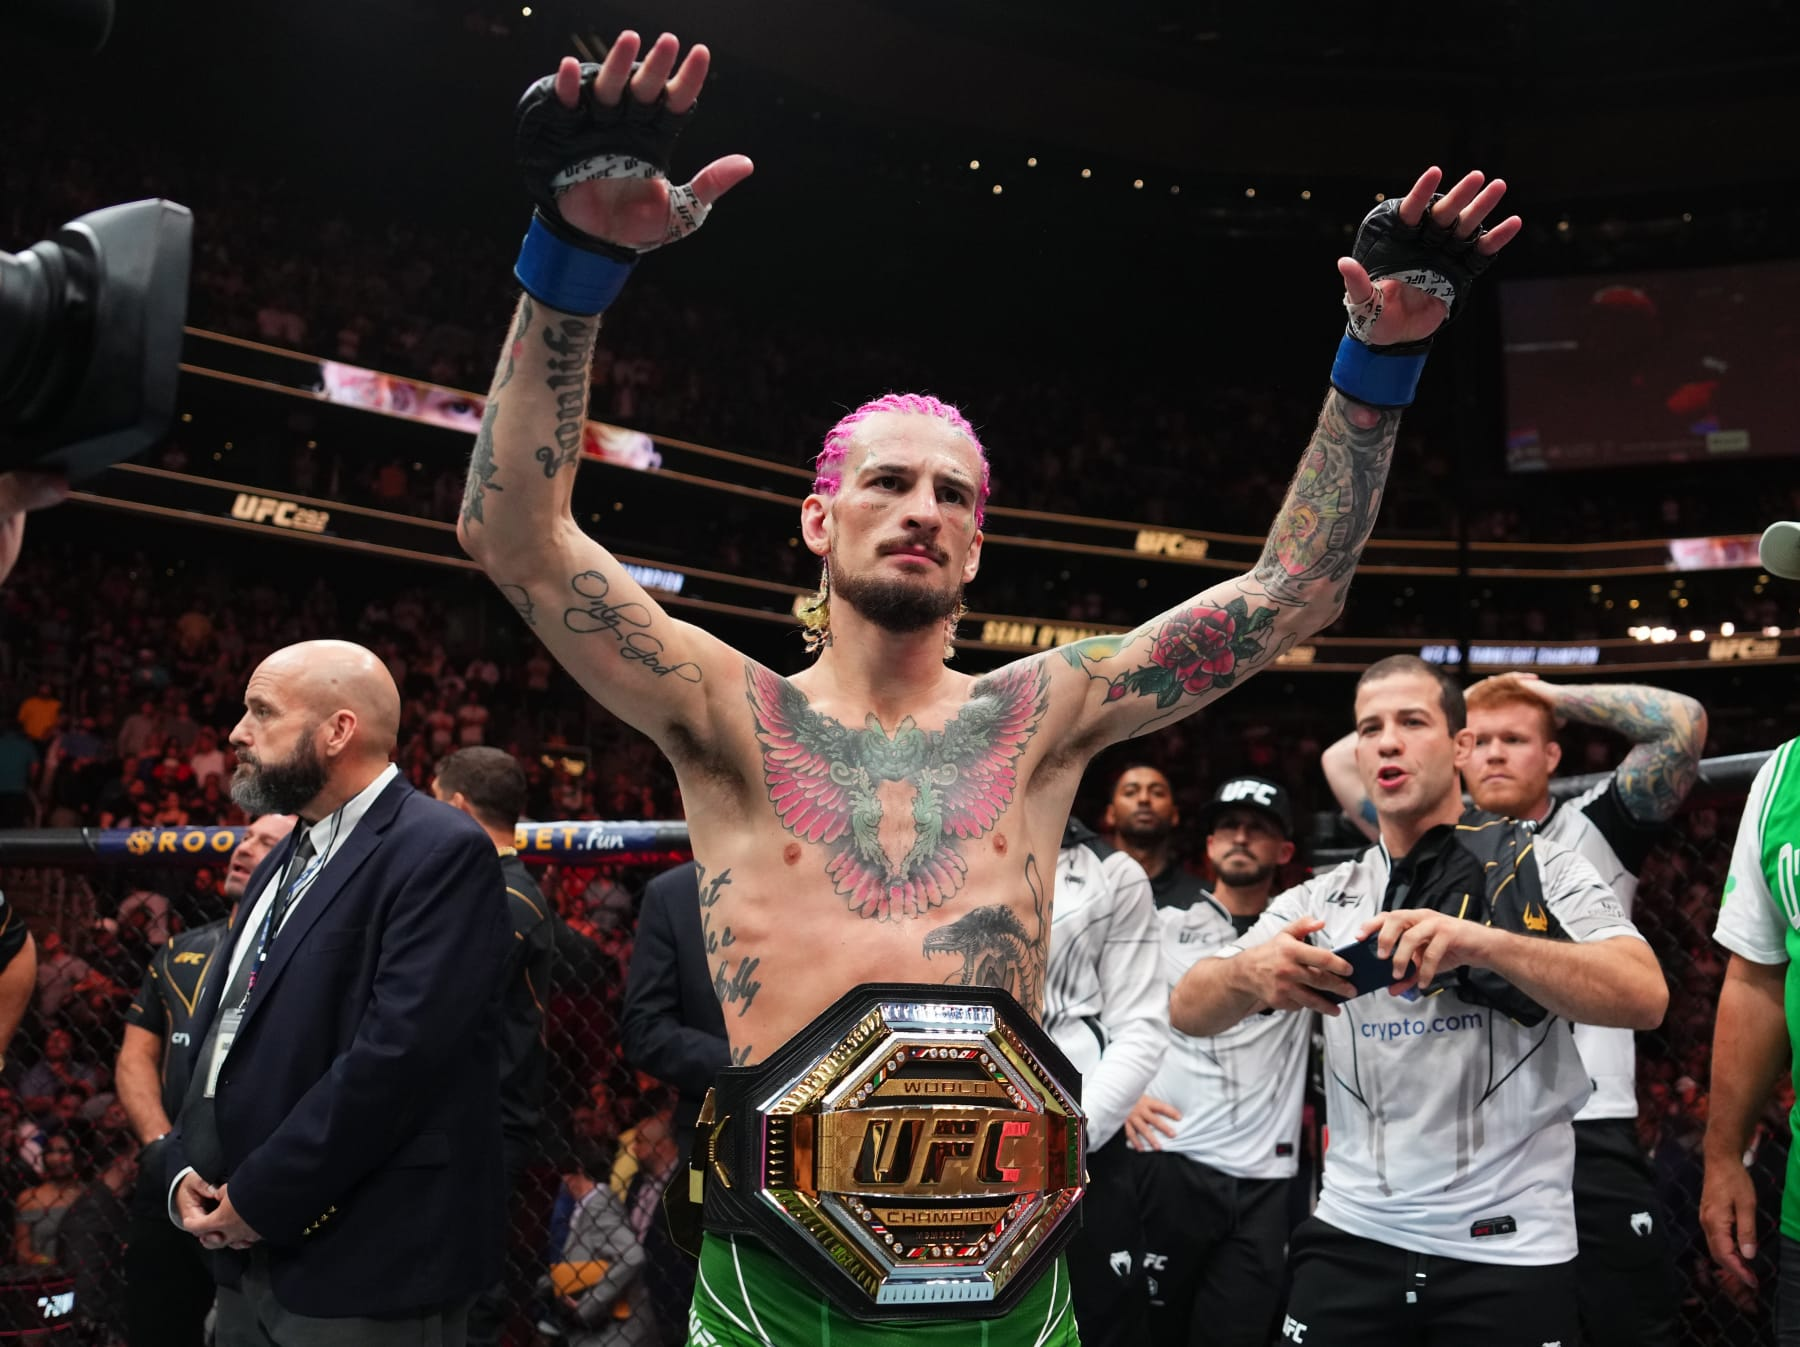 UFC Champ Sean O’Malley Claims He Turned Down Hollywood Movie Role Despite the Offer